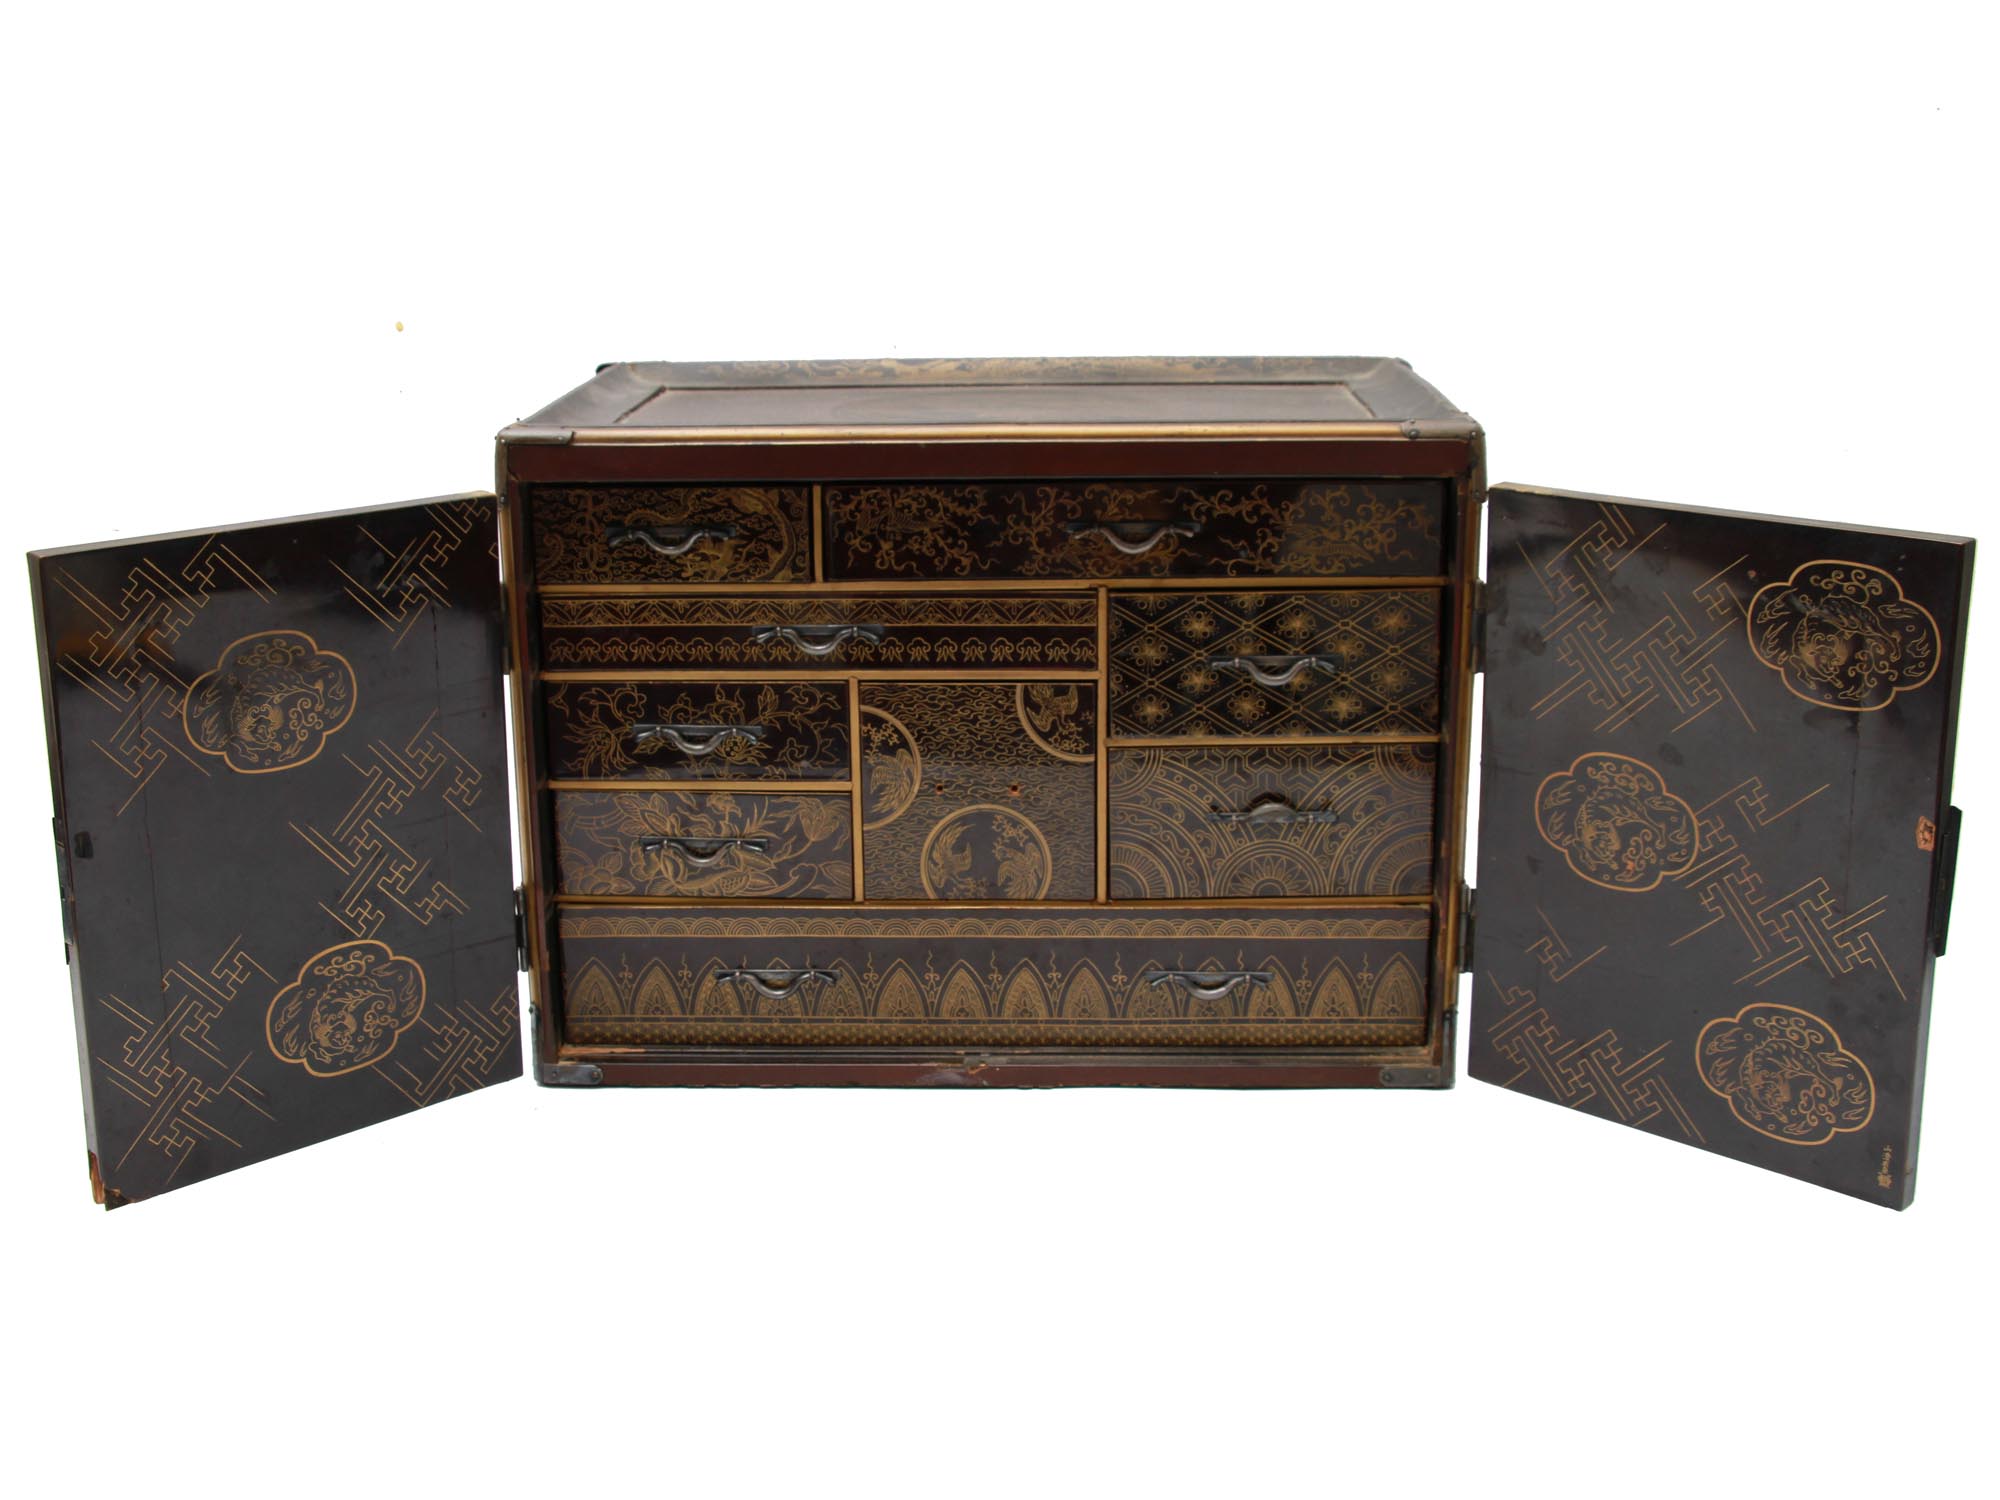 ANTIQUE JAPANESE LACQUER STORAGE CHEST PIC-3